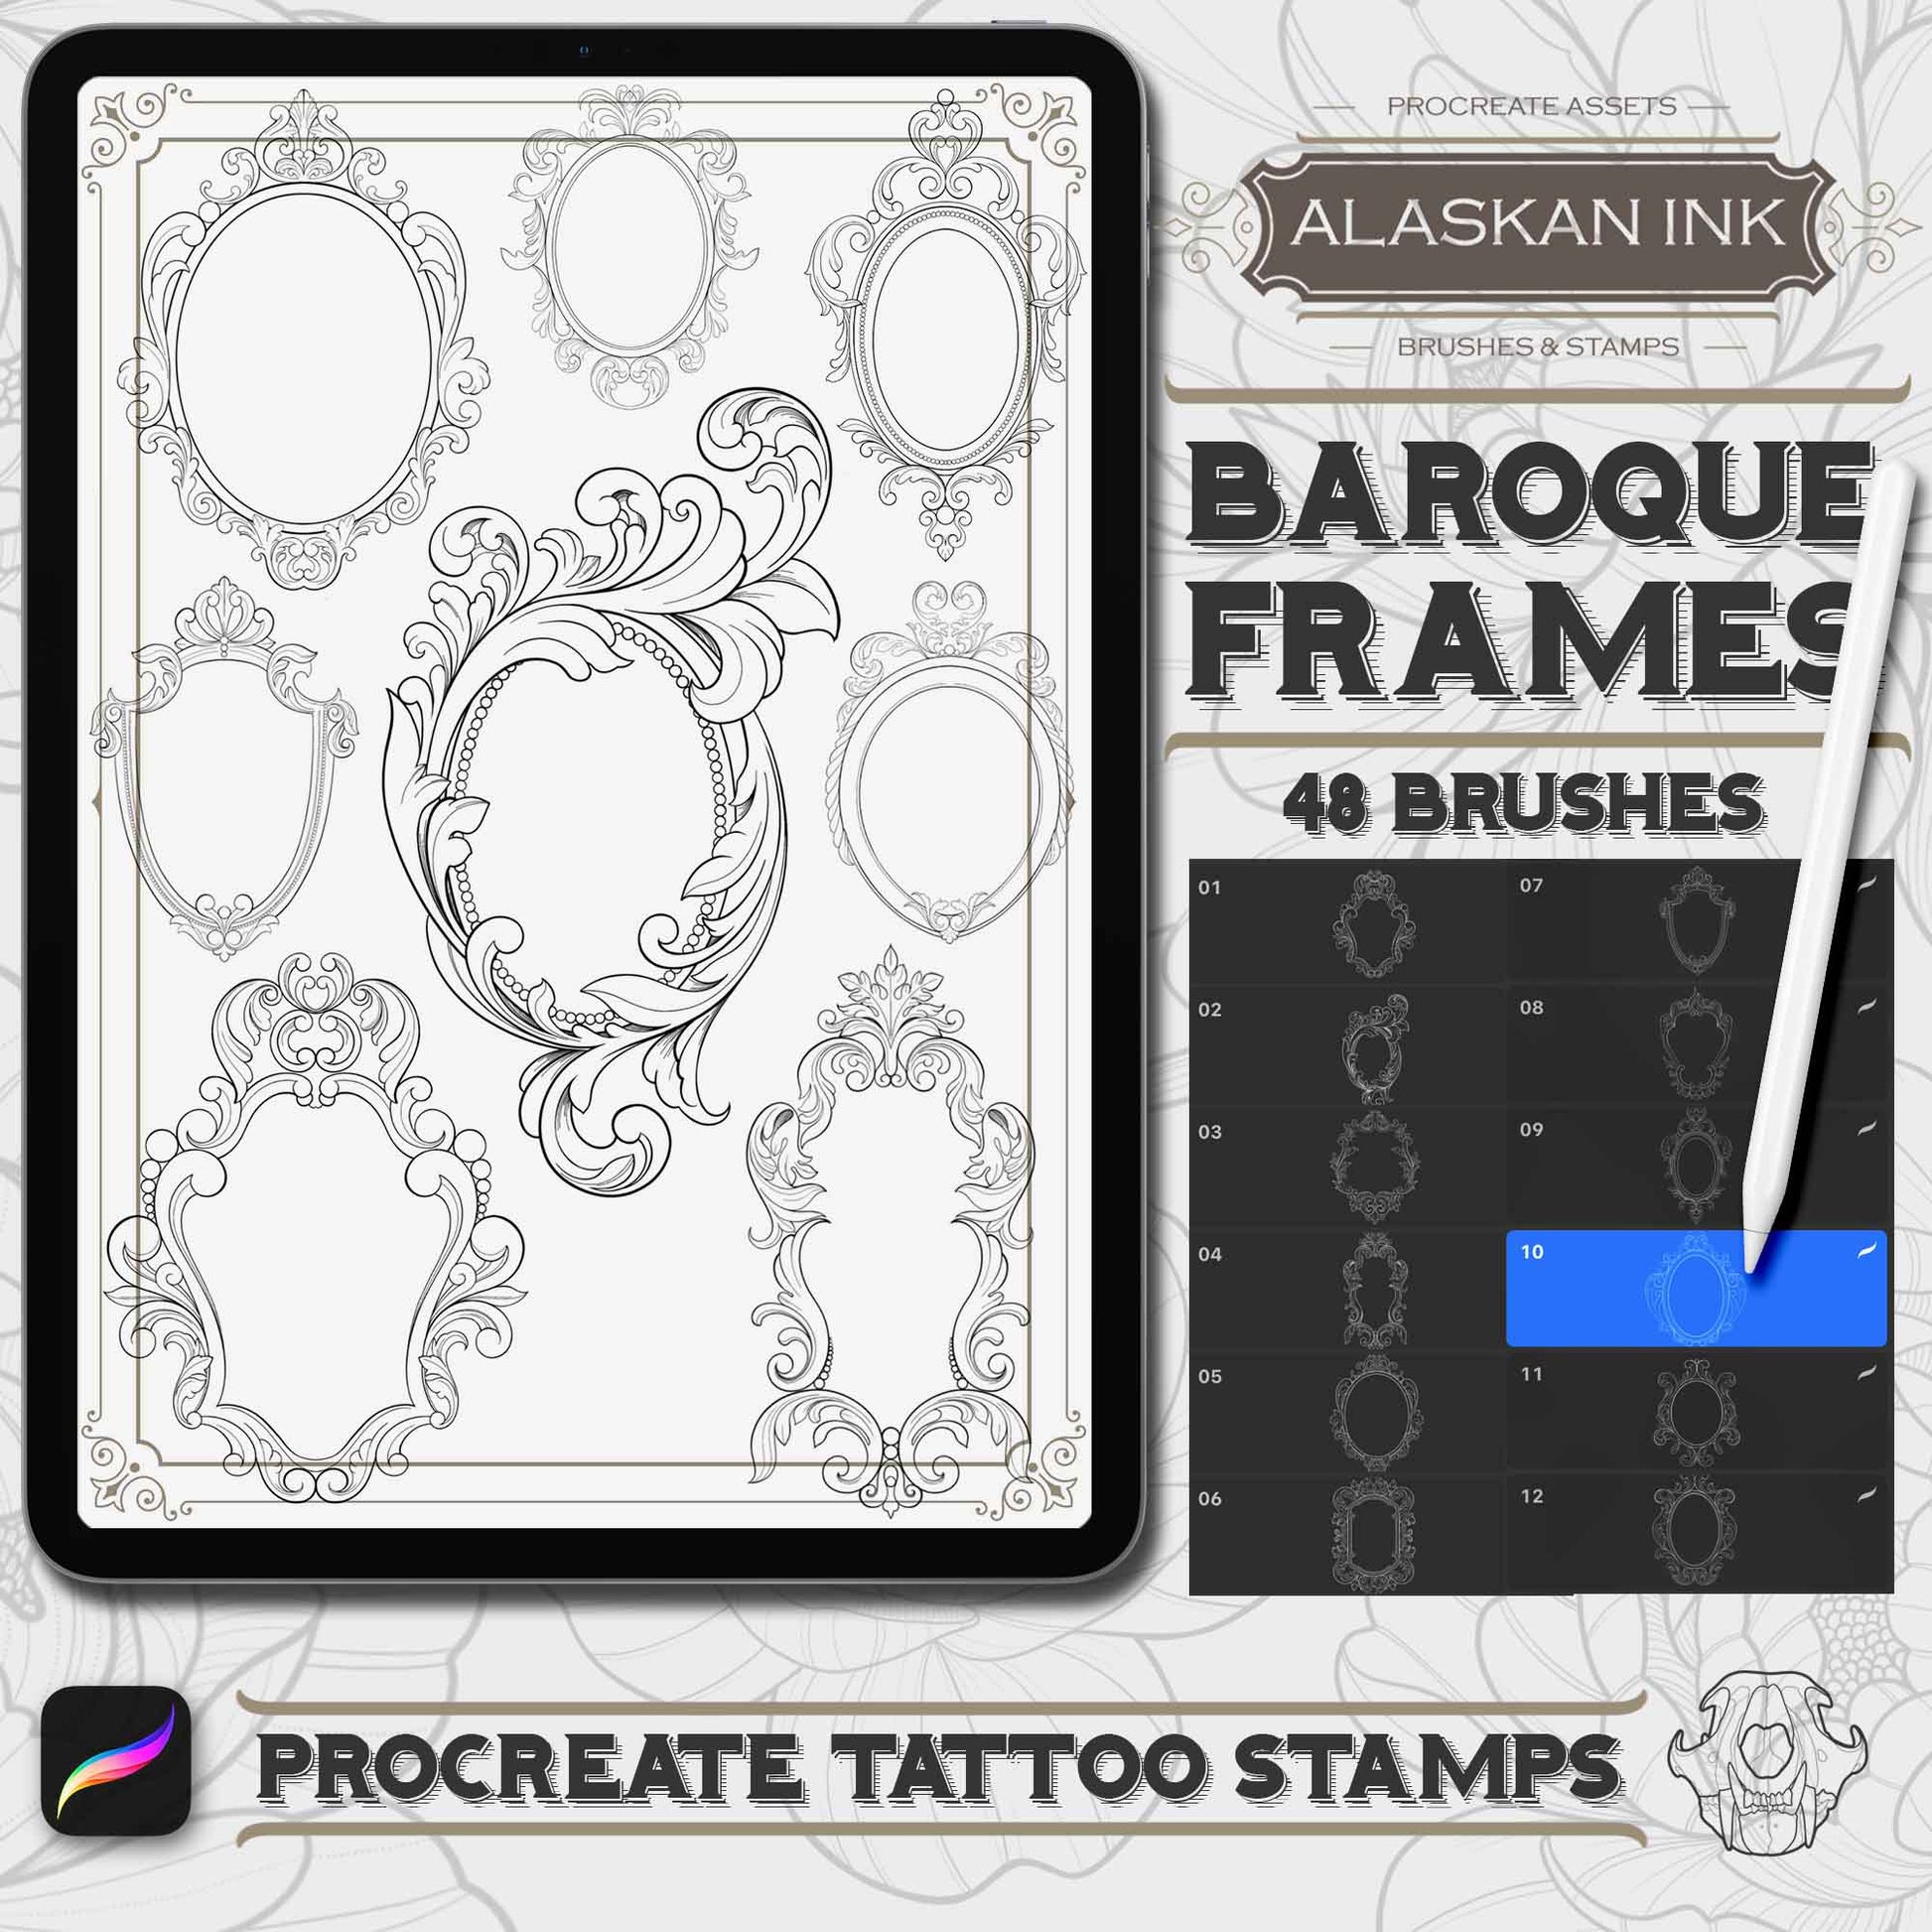 48 Baroque Frames Procreate Tattoo Brushes compatible with iPad and iPad pro by Alaskan ink studio